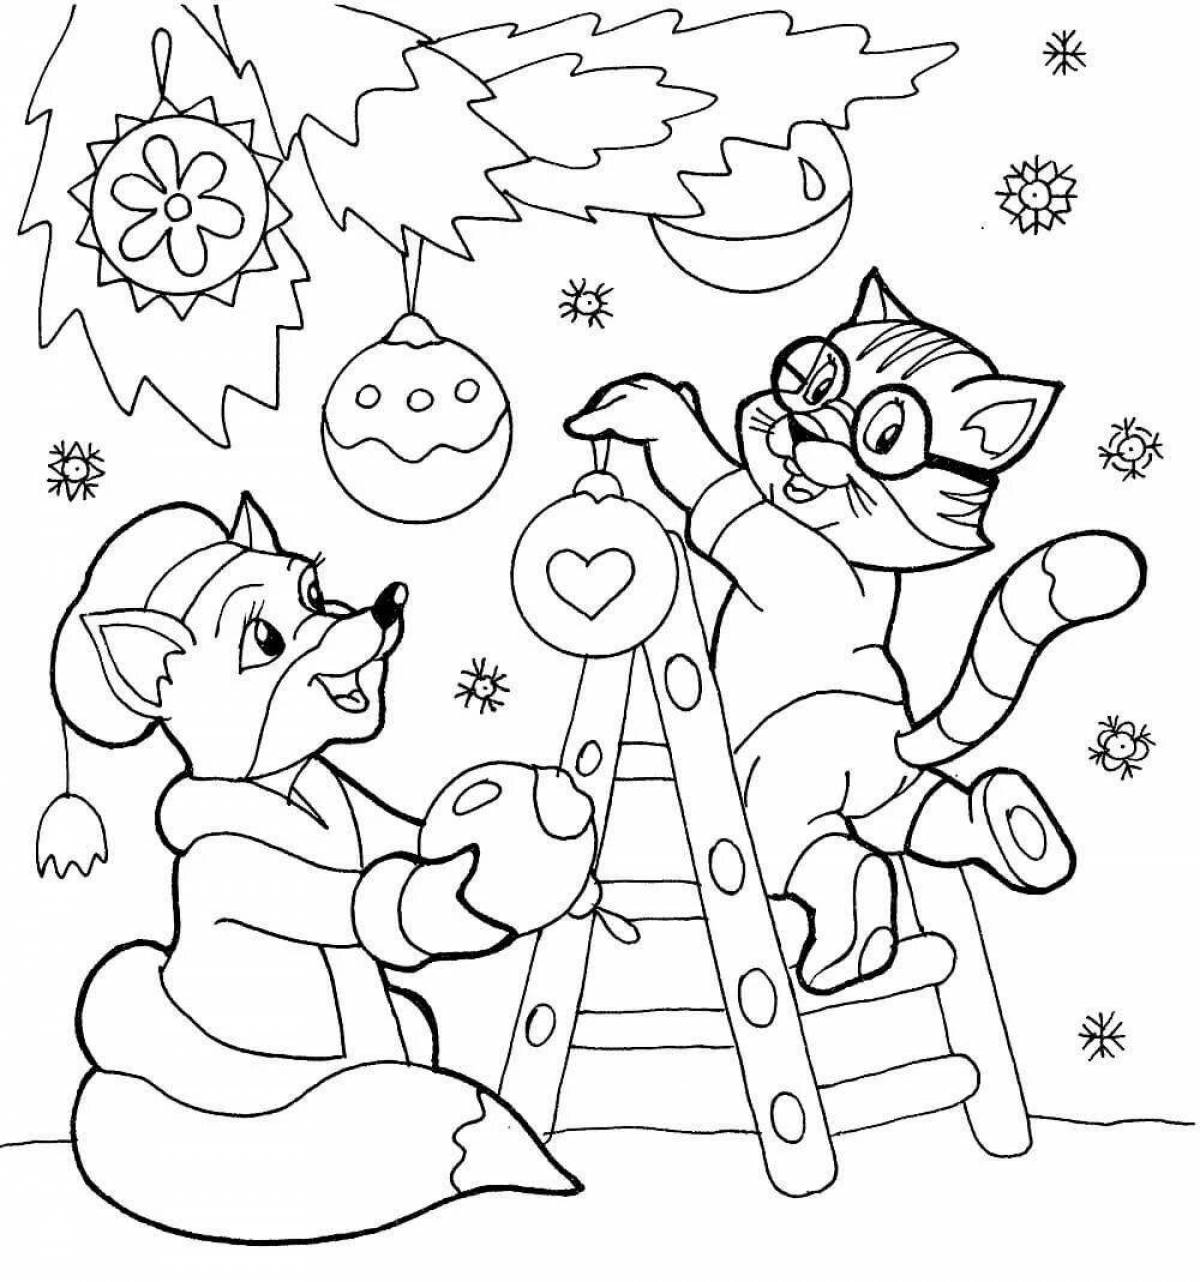 Fancy fox christmas coloring book